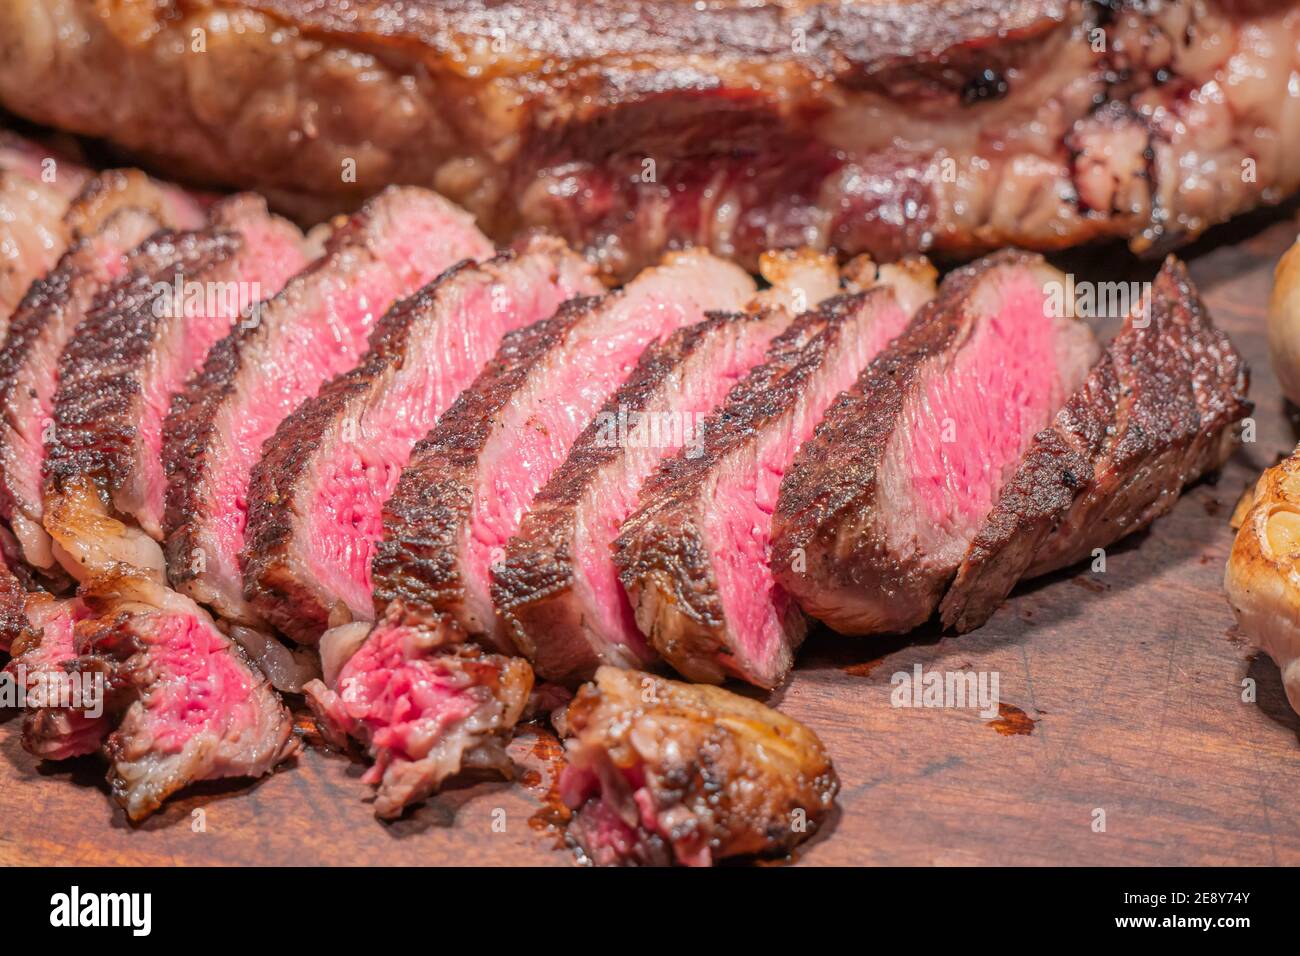 Dry-aged marble beef steak Tomahawk on wooden board with spices. Close-up, dinner concept. Stock Photo